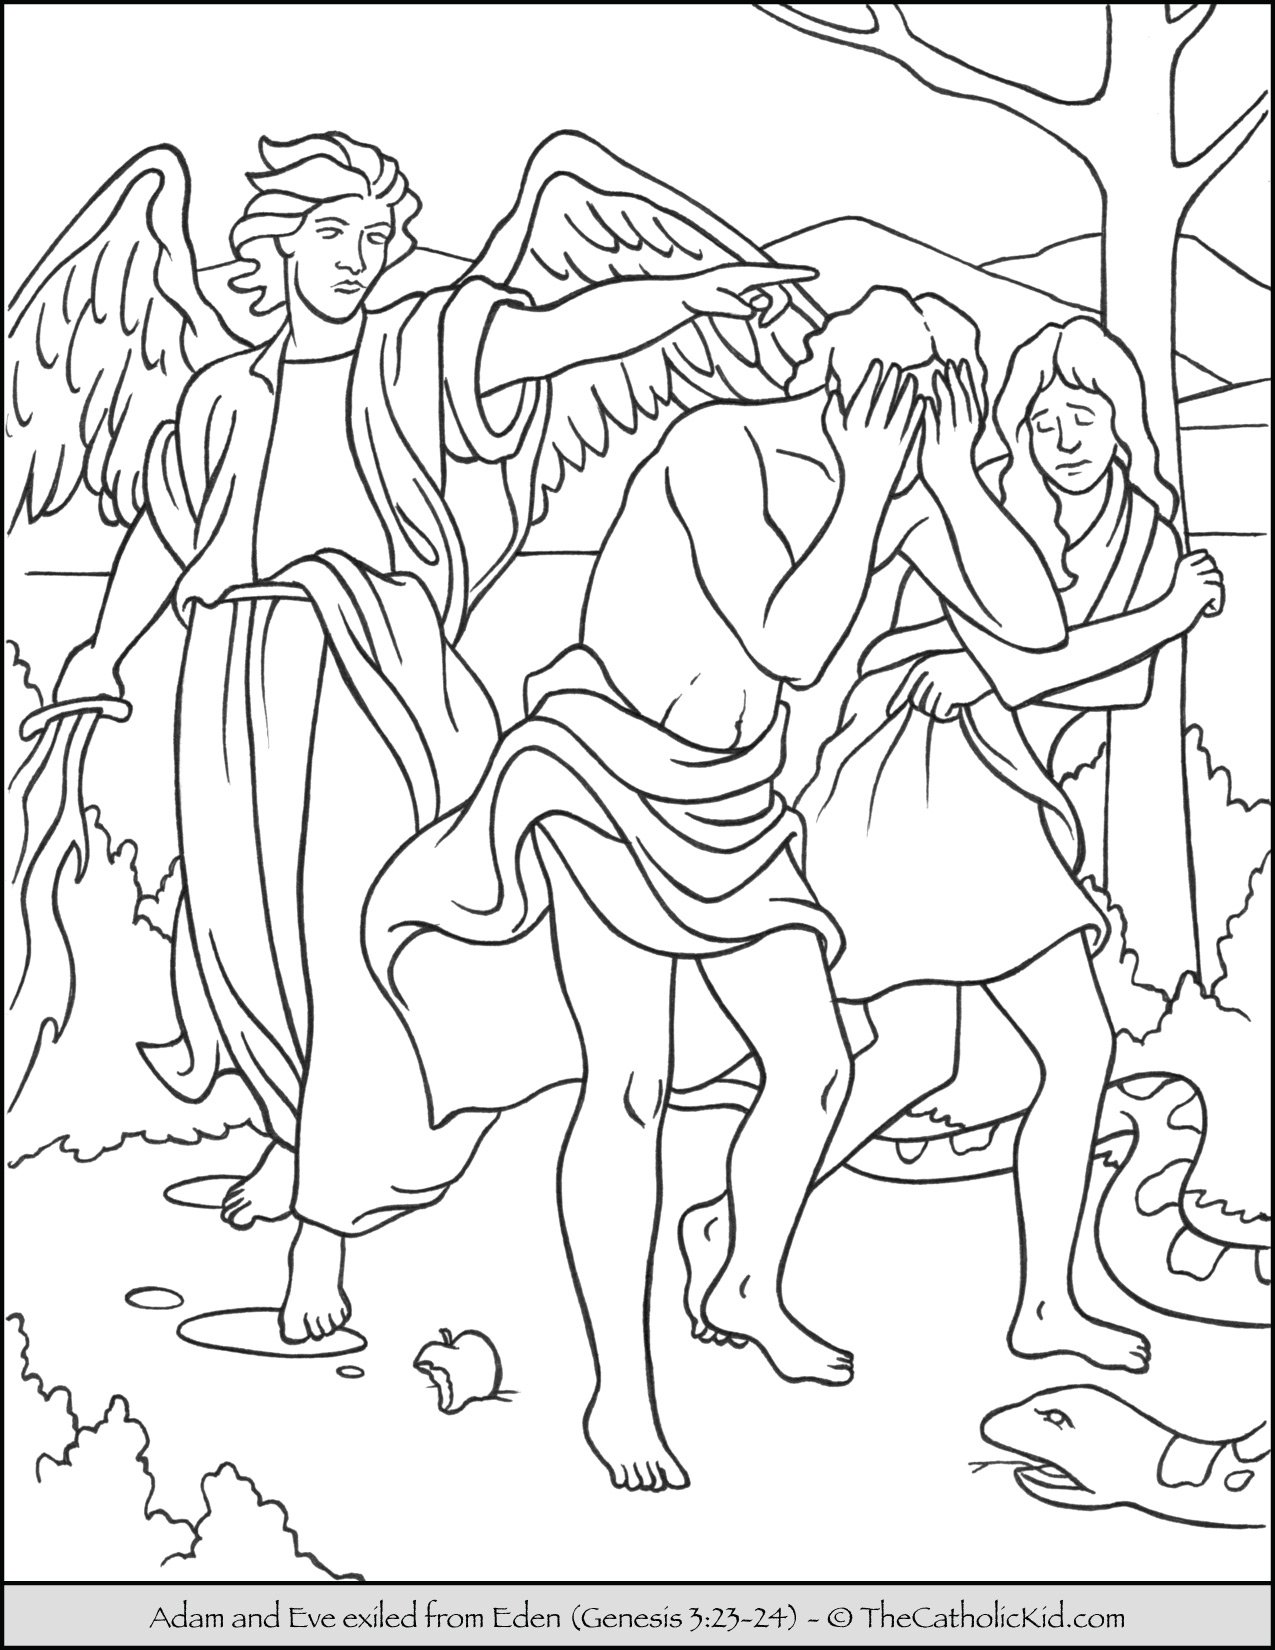 Bible Coloring Page - Adam and Eve Exiled from Eden - TheCatholicKid.com